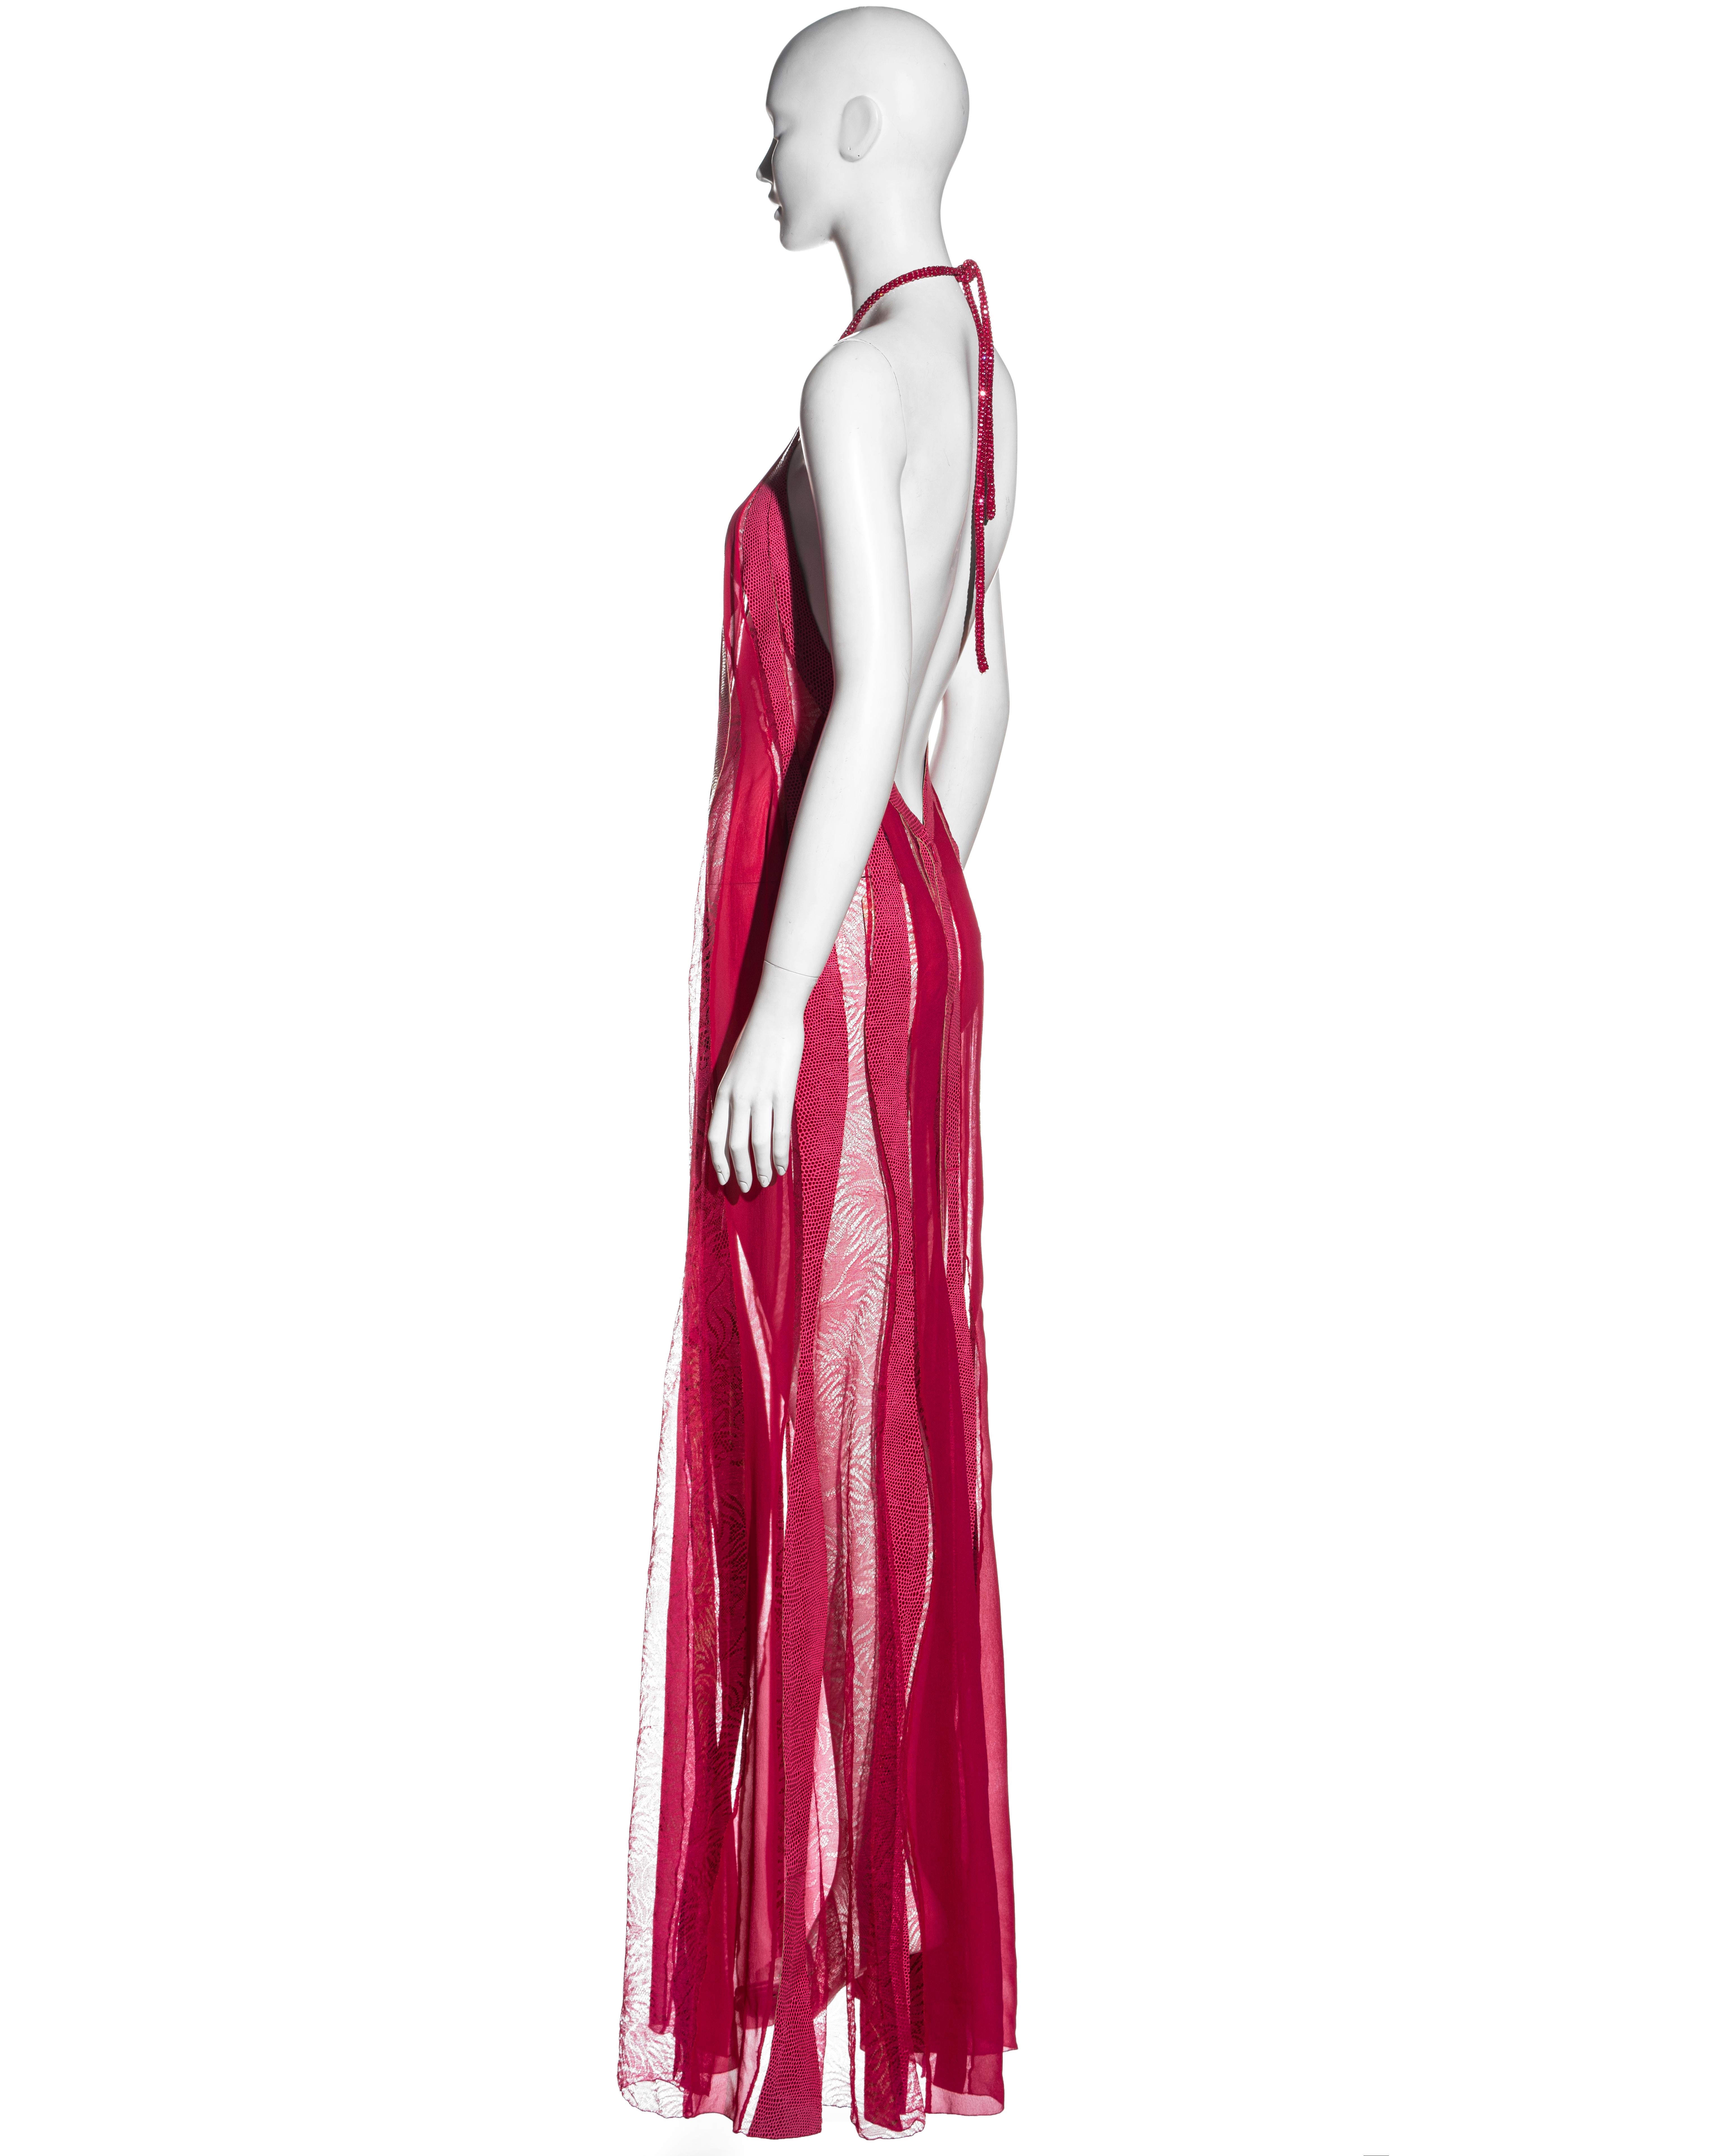 Gianni Versace pink silk, leather and lace halter neck maxi dress, fw 2000 For Sale 3